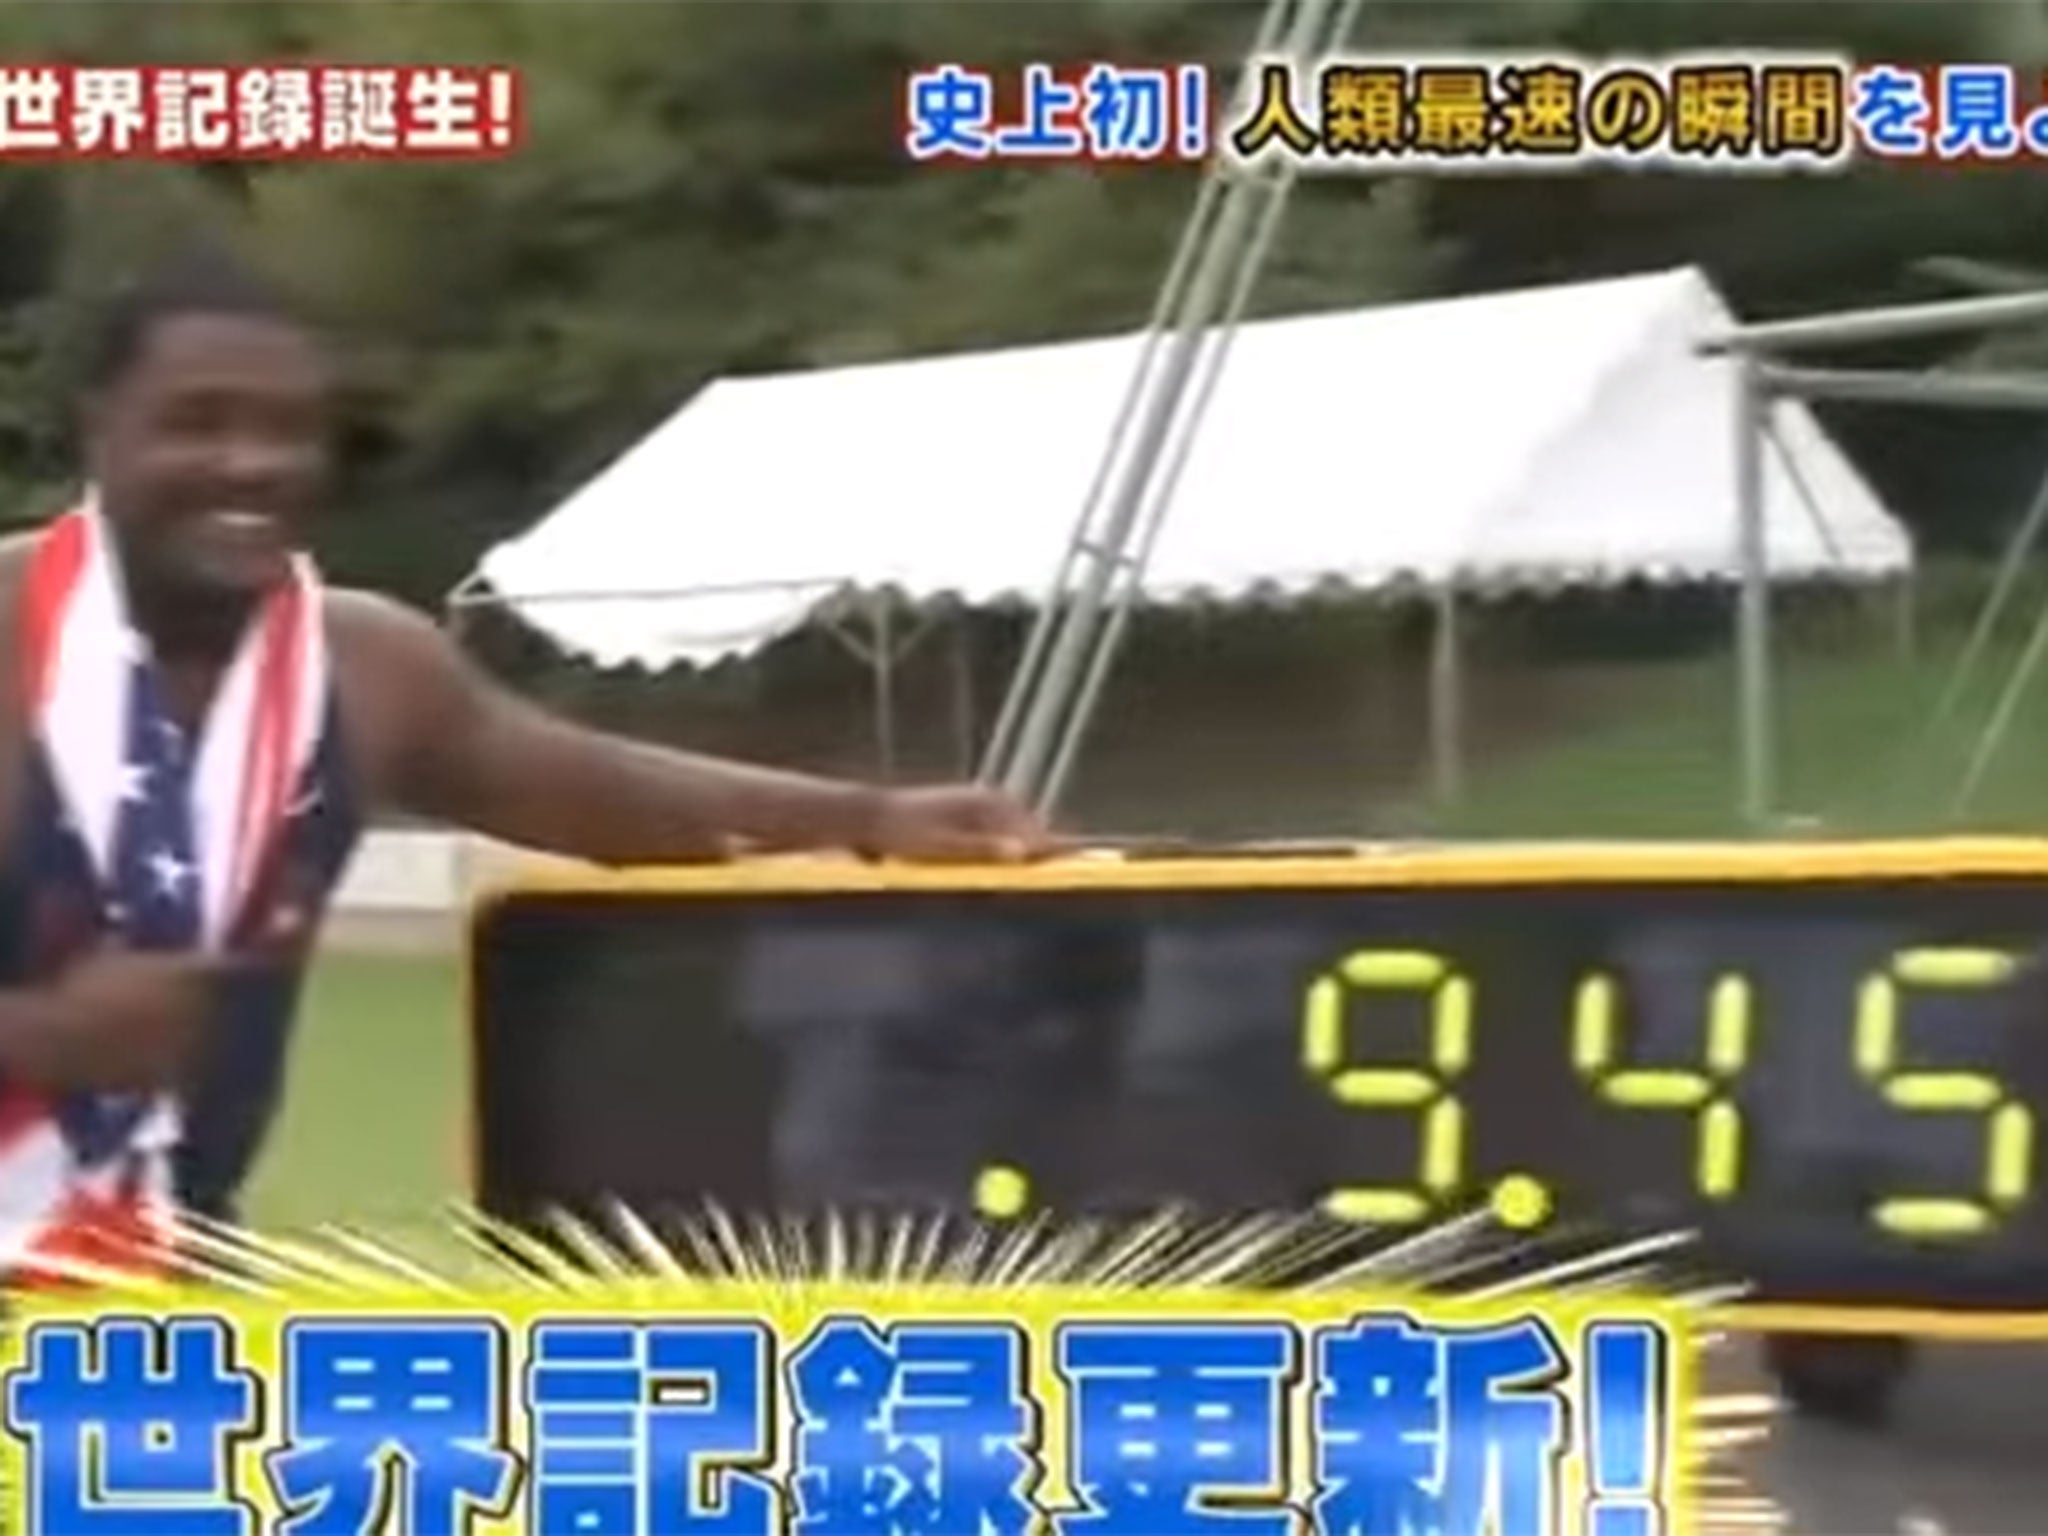 Justin Gatlin poses next to the time